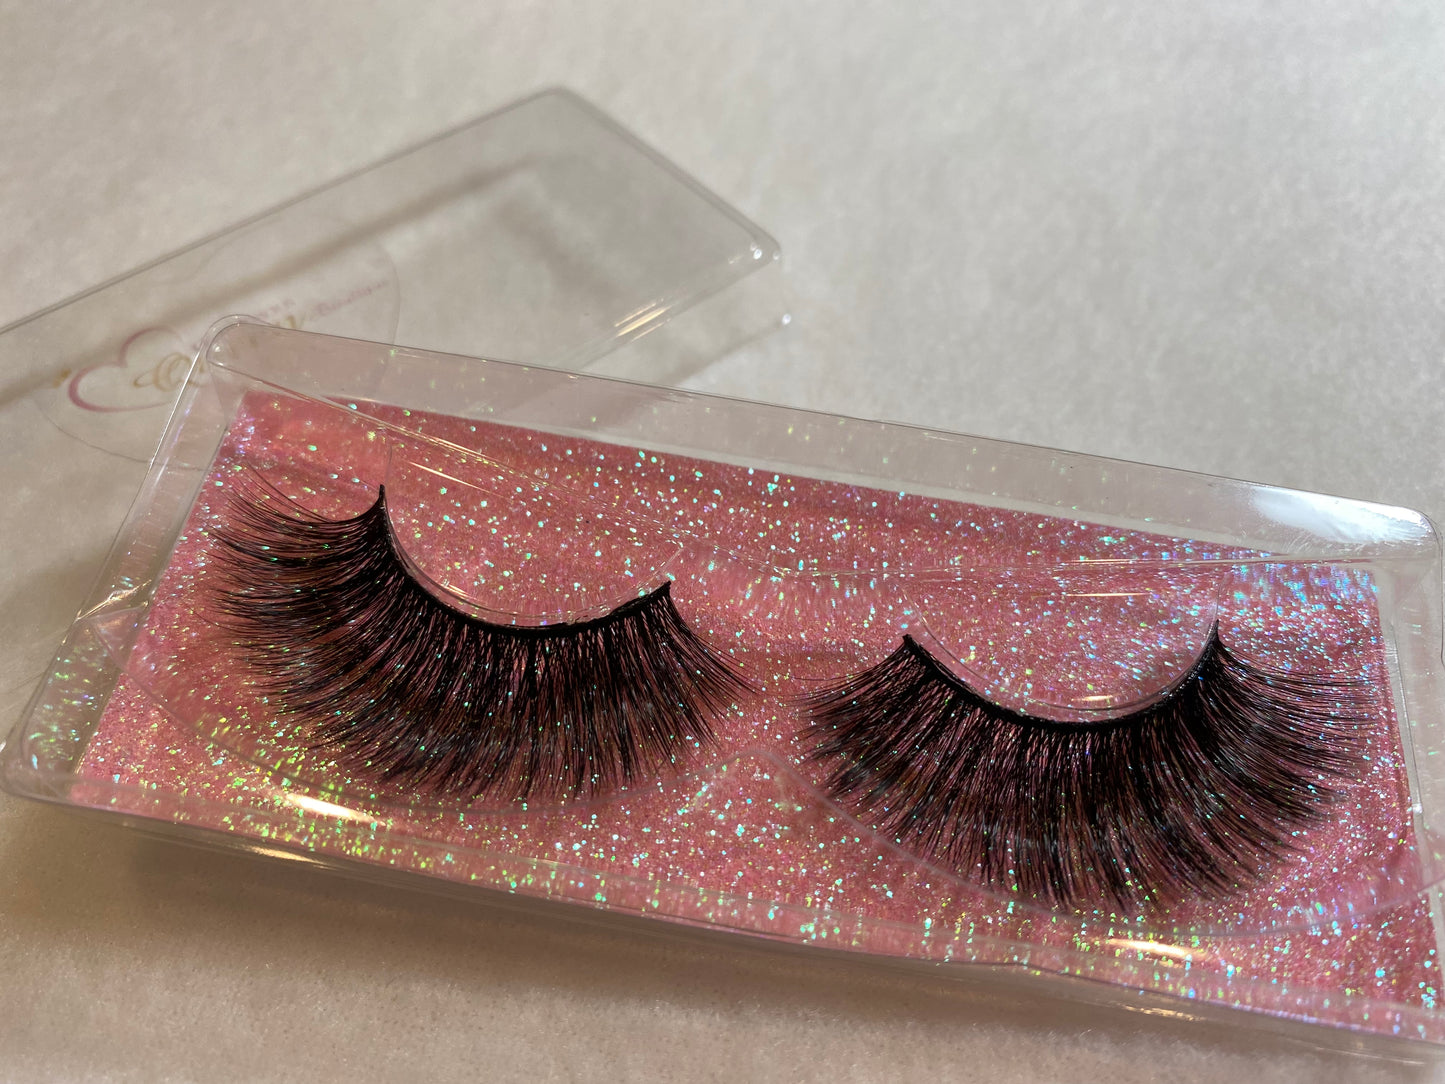 Toxica Lashes